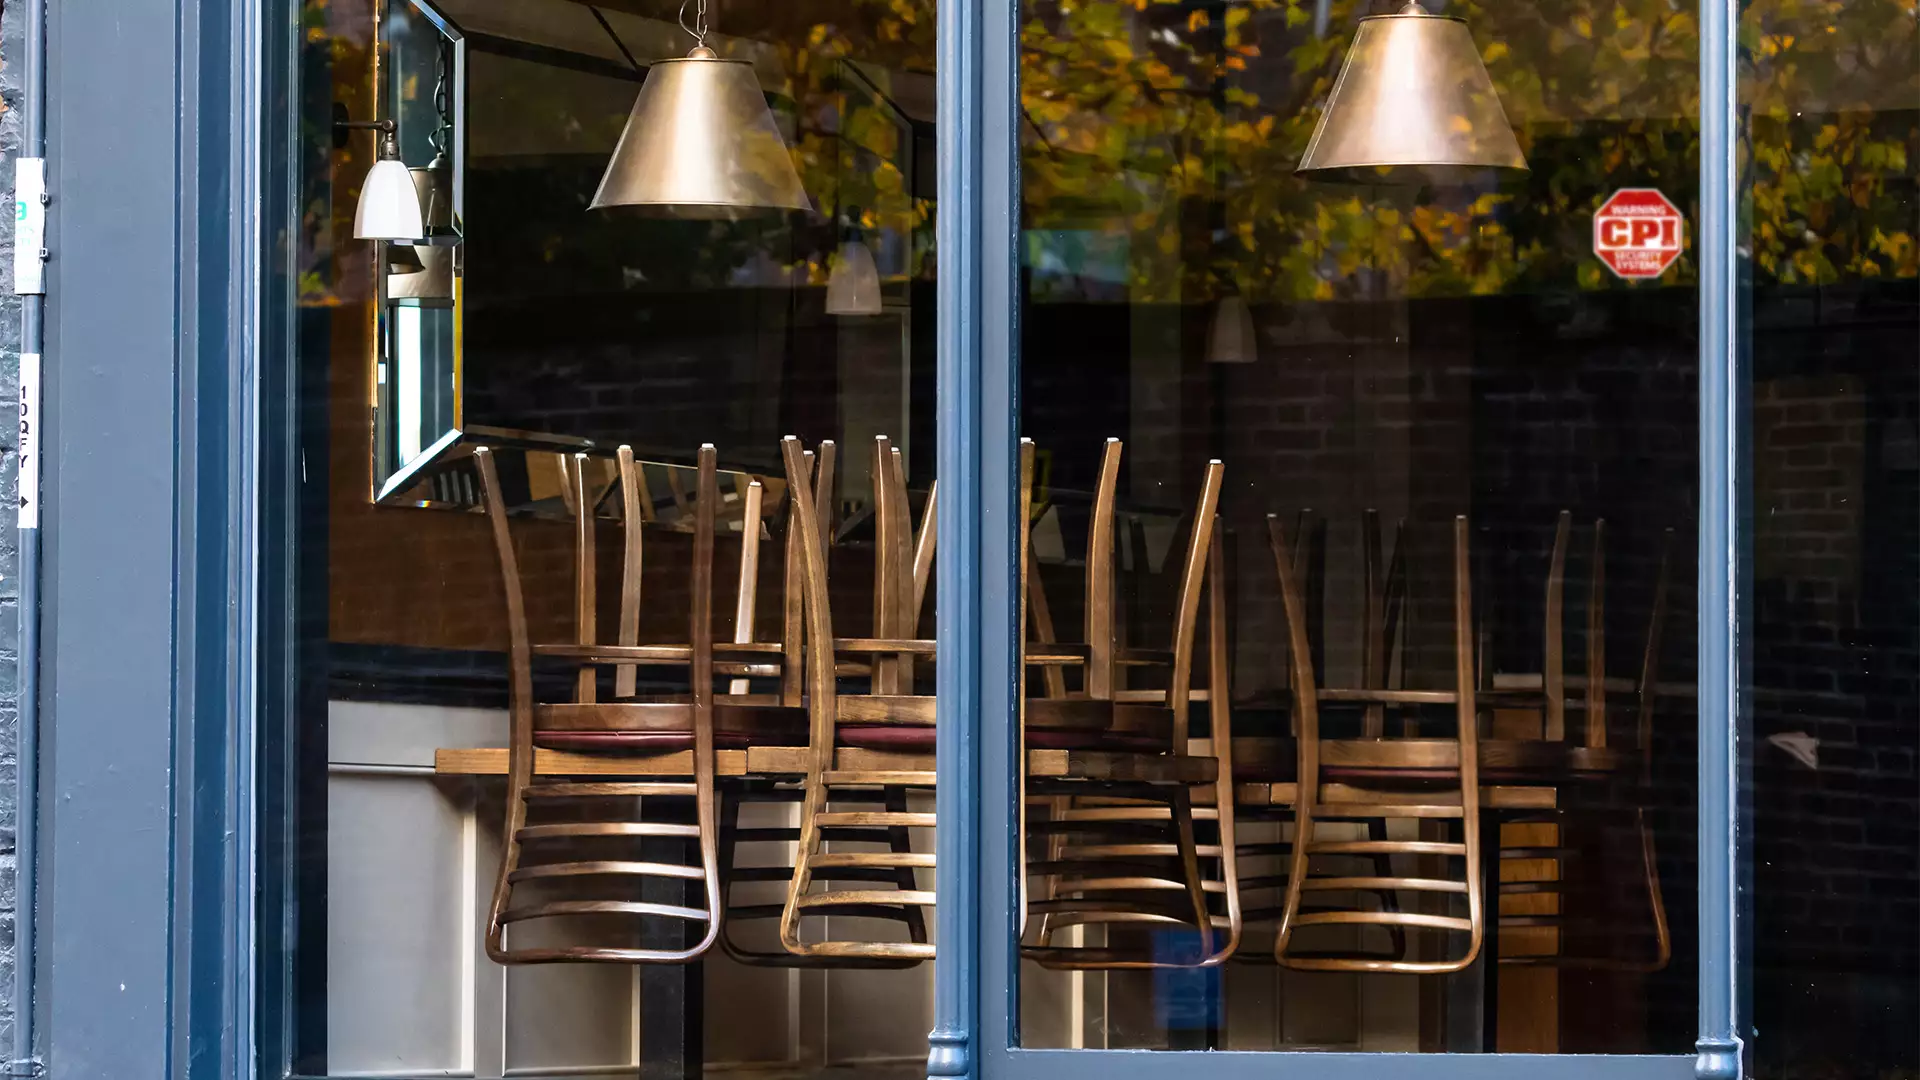 Restaurant Security | CPI Business Security